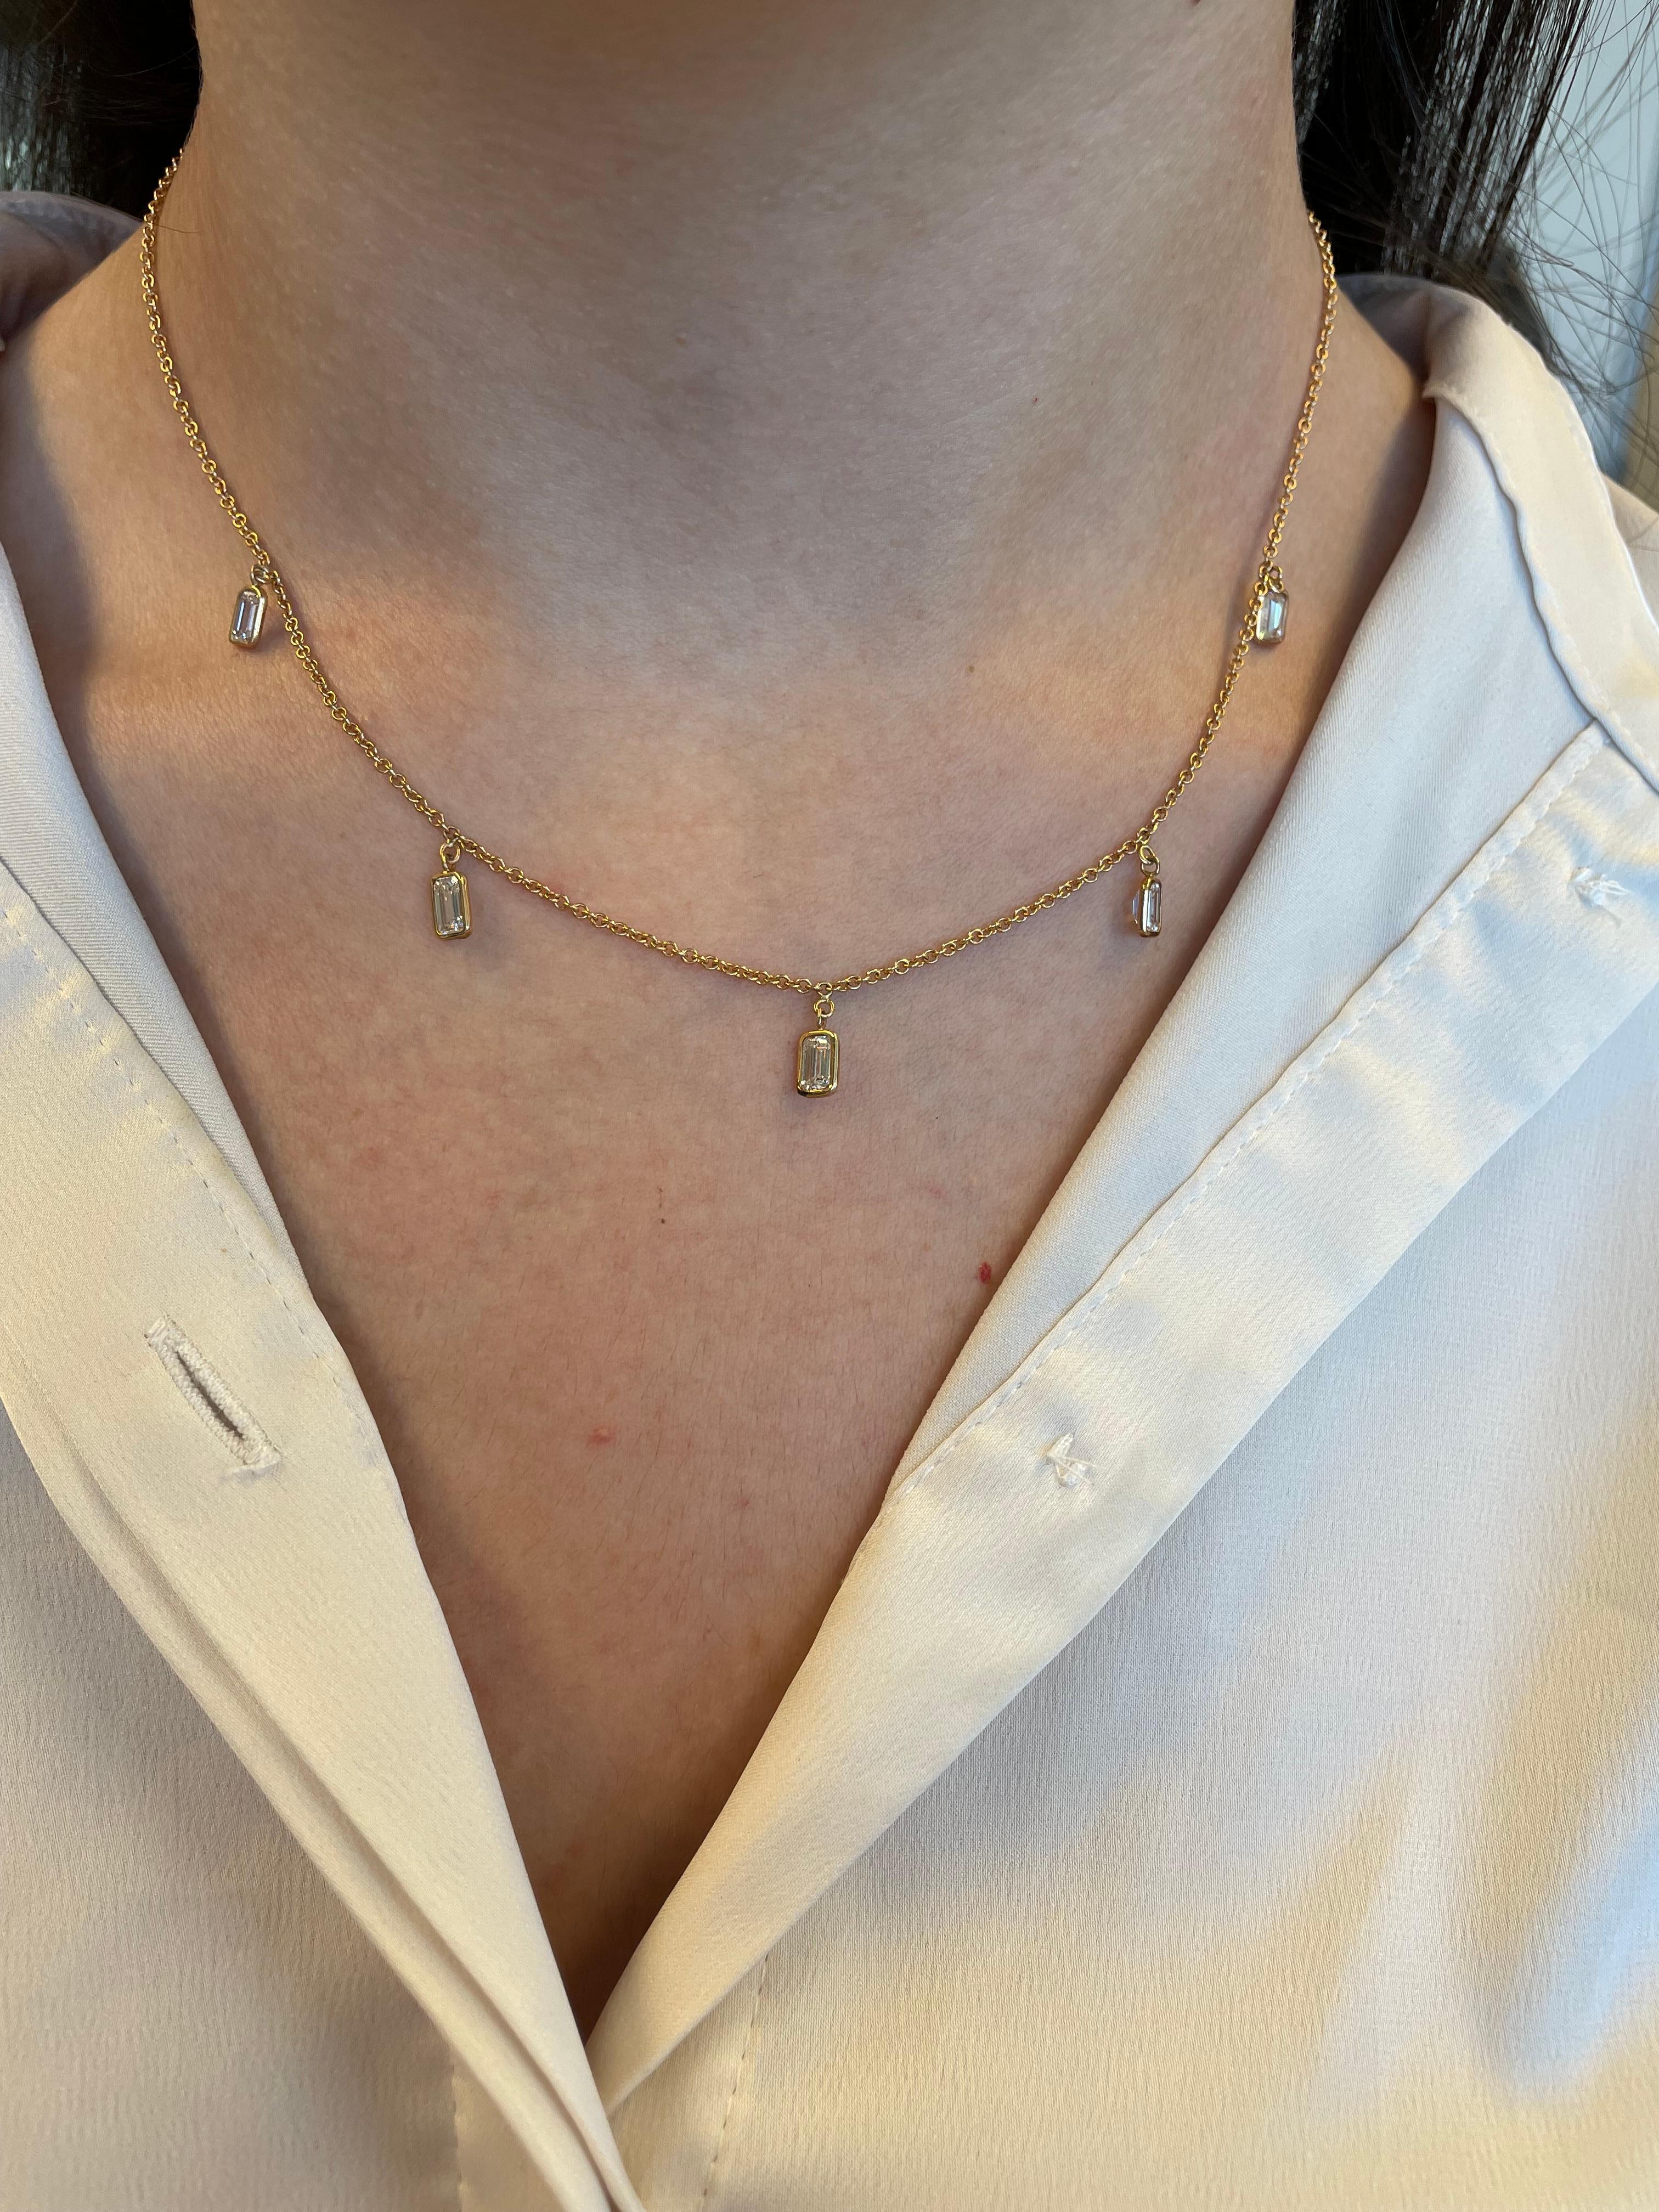 Exquisite dangling emerald cut diamonds by the yard modern necklace. By Alexander Beverly Hills.
5 emerald cut diamonds, 1.93 carats total. Approximately G/H color and VS clarity. Bezel set in 18k rose gold. 
Accommodated with an up-to-date